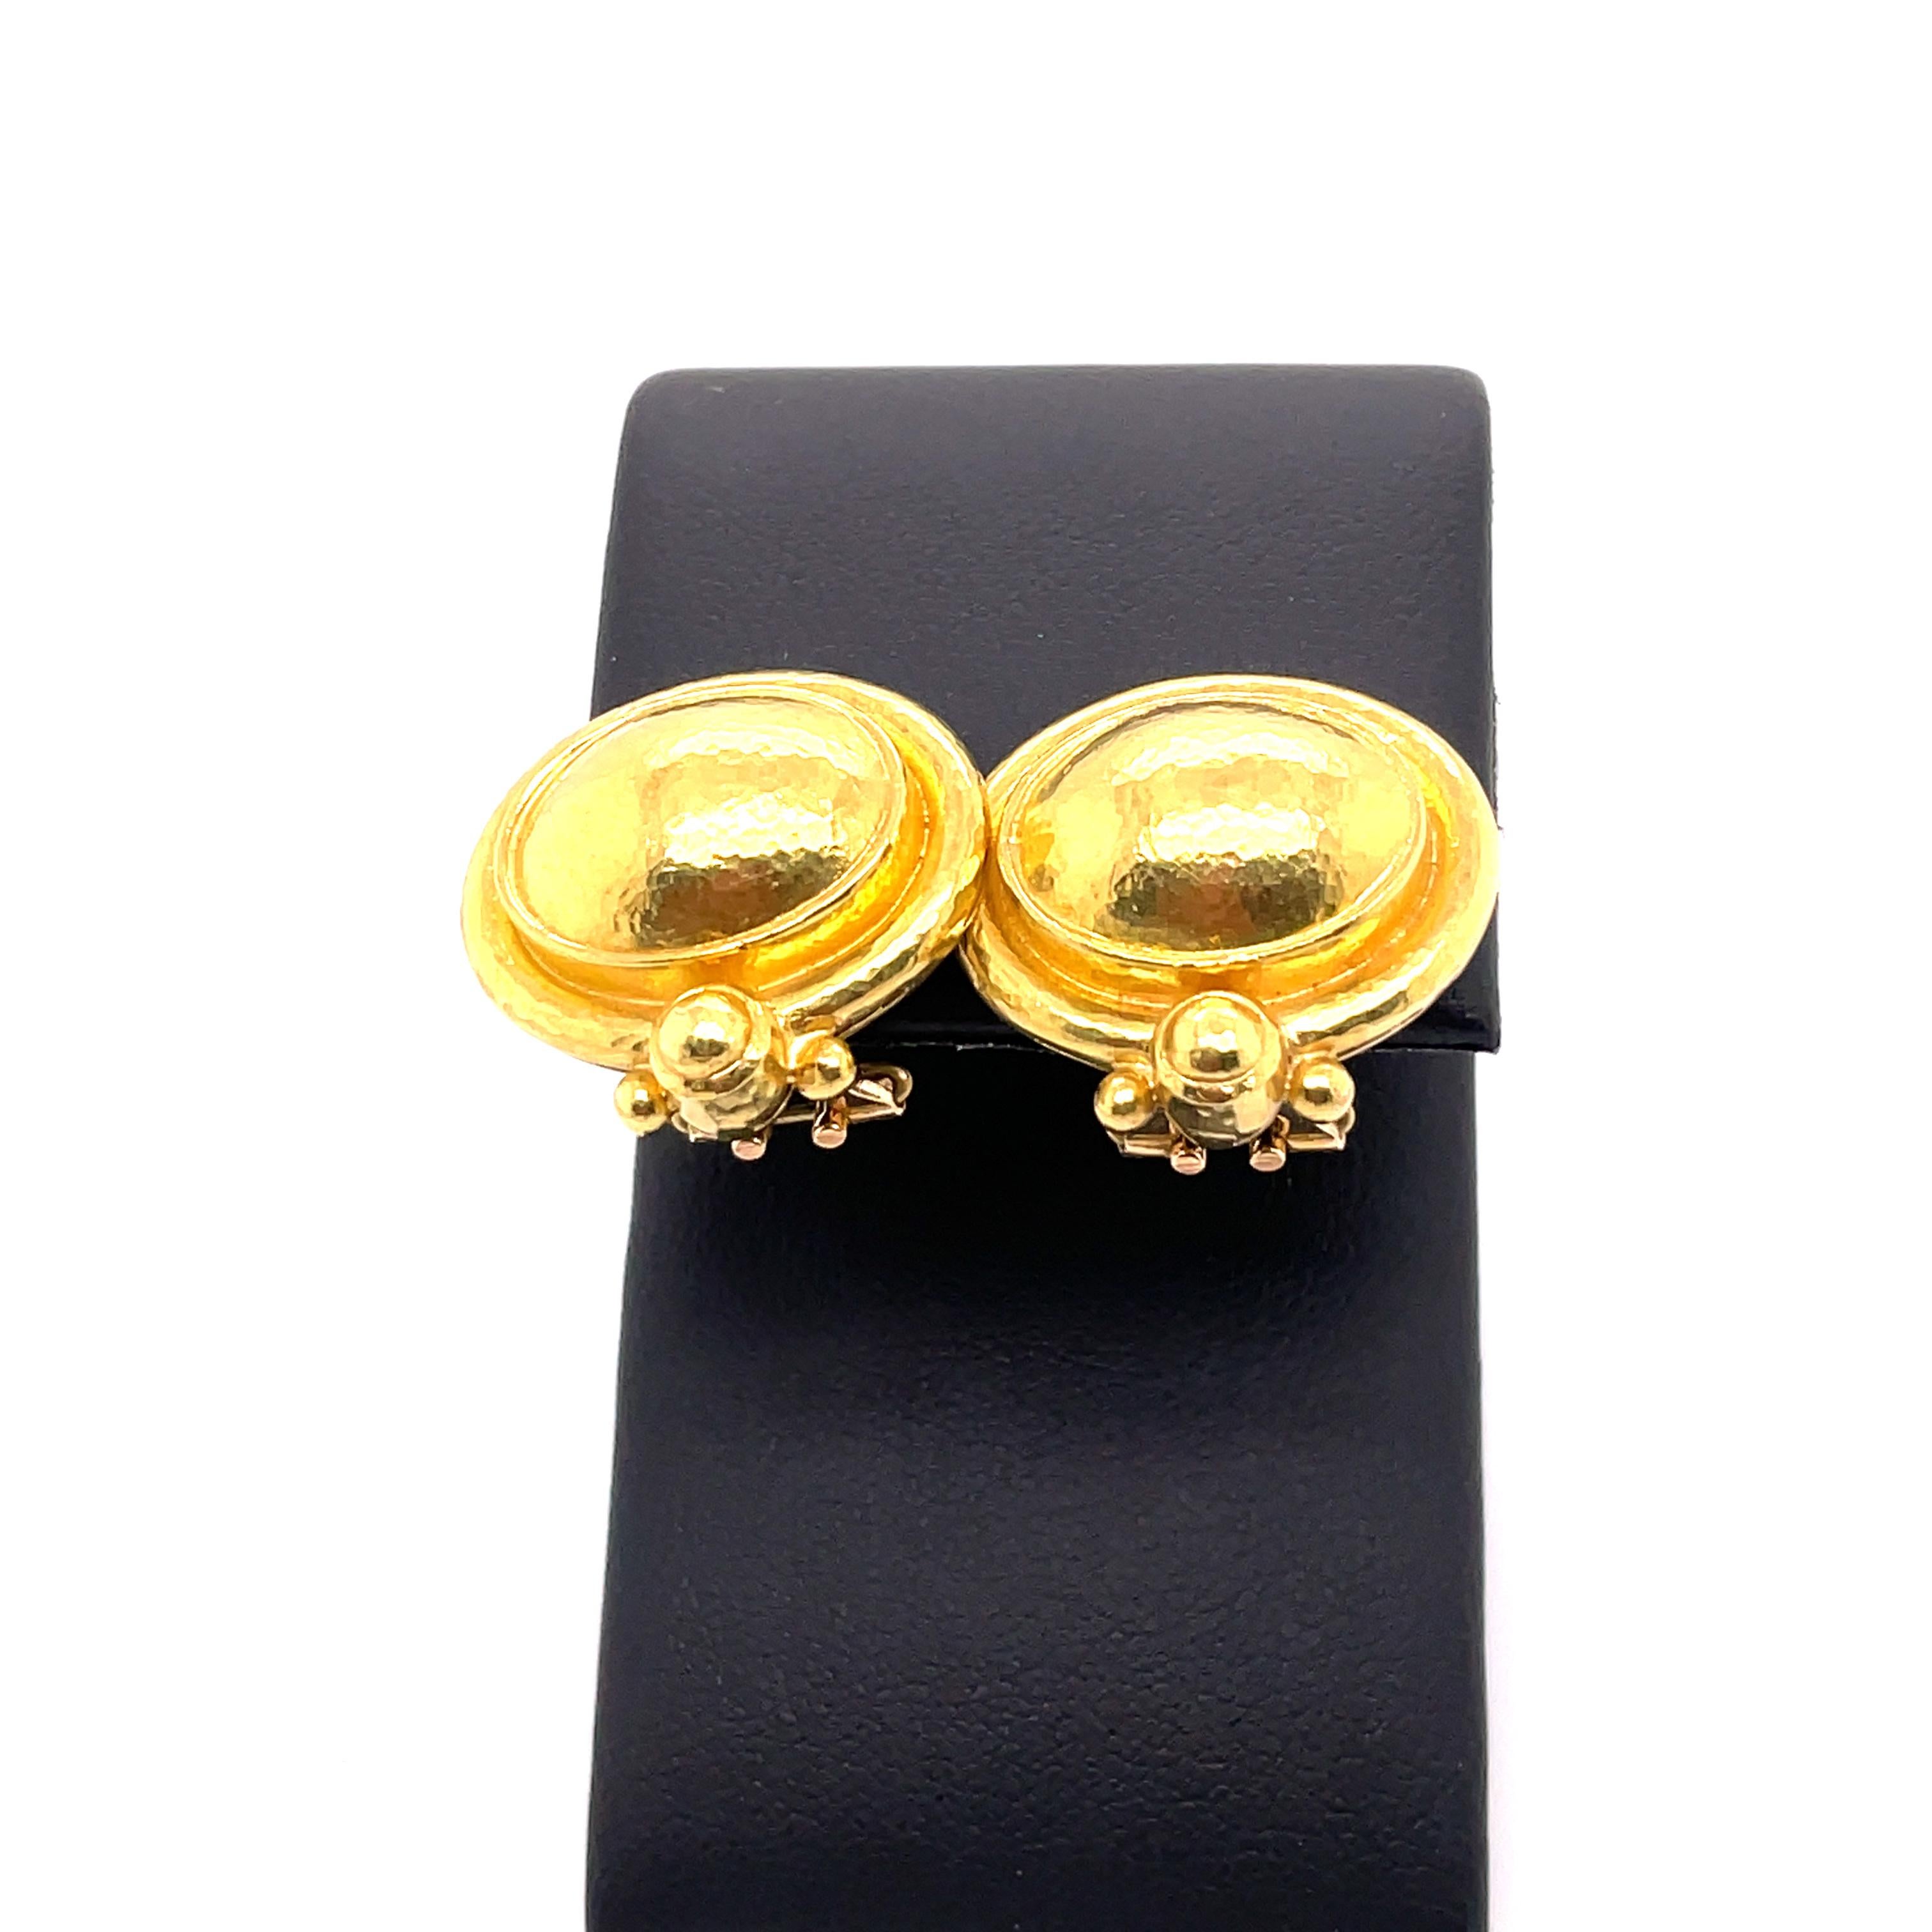 Perfect and Classic Elizabeth Locke gold earrings that can be worn with posts or without. Great omega backs for a comfortable feel. Stamped Locke and 18kt